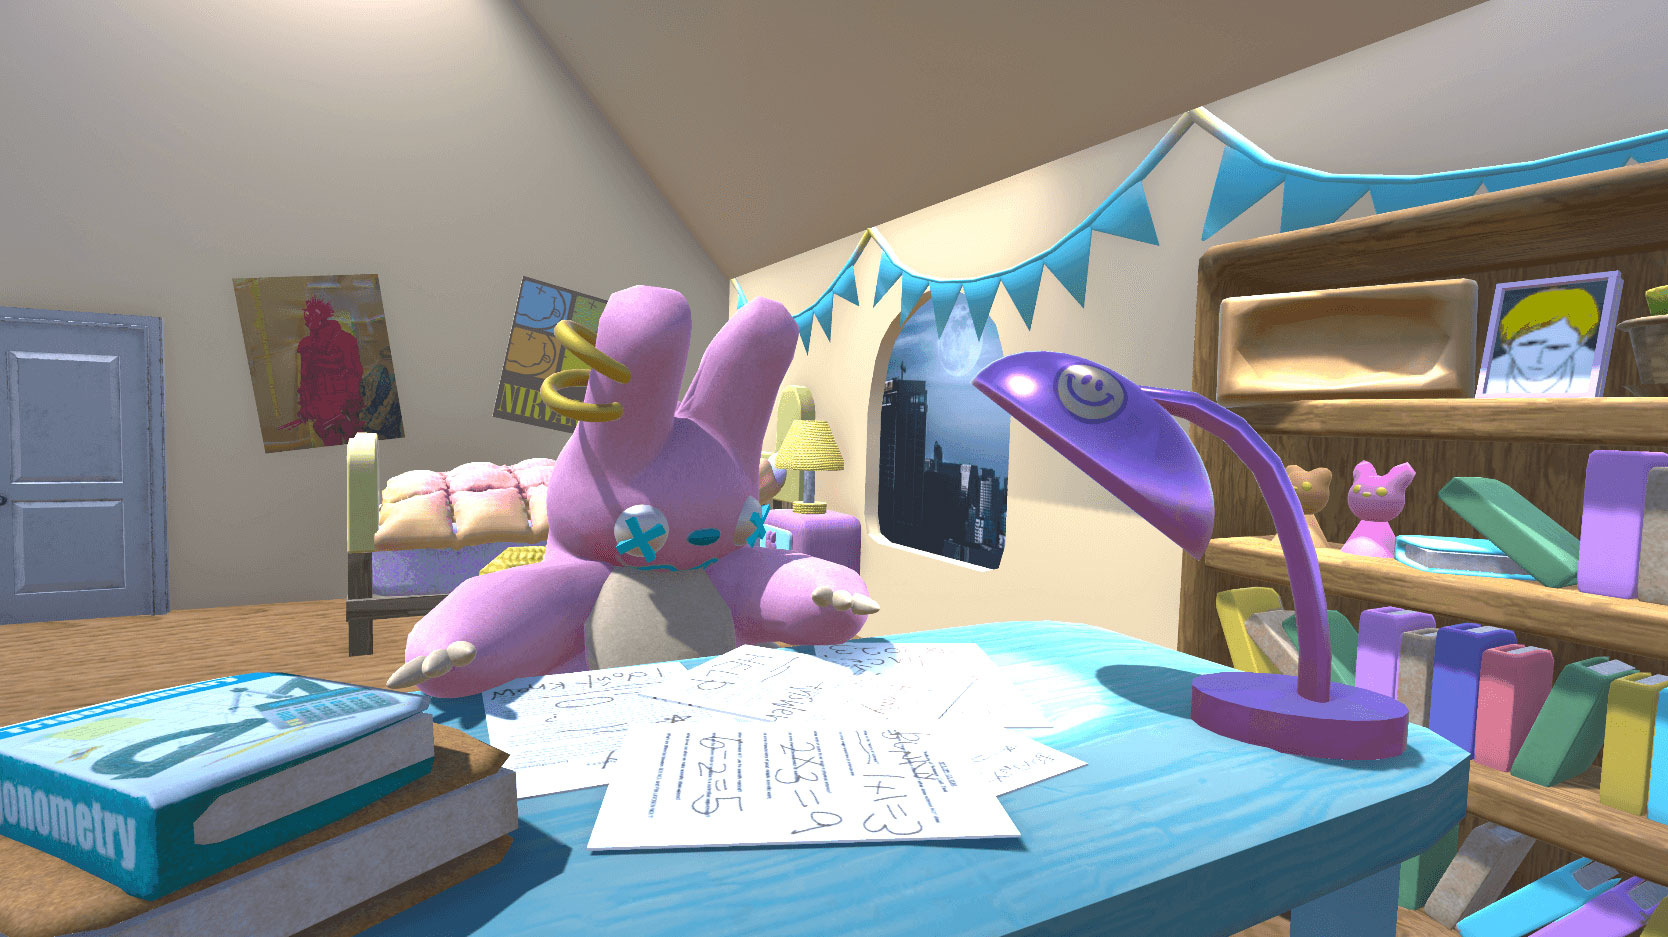 Cozy room with a pink plush bunny sitting at a desk, surrounded by books, papers with math equations, and a purple lamp with a smiley face.